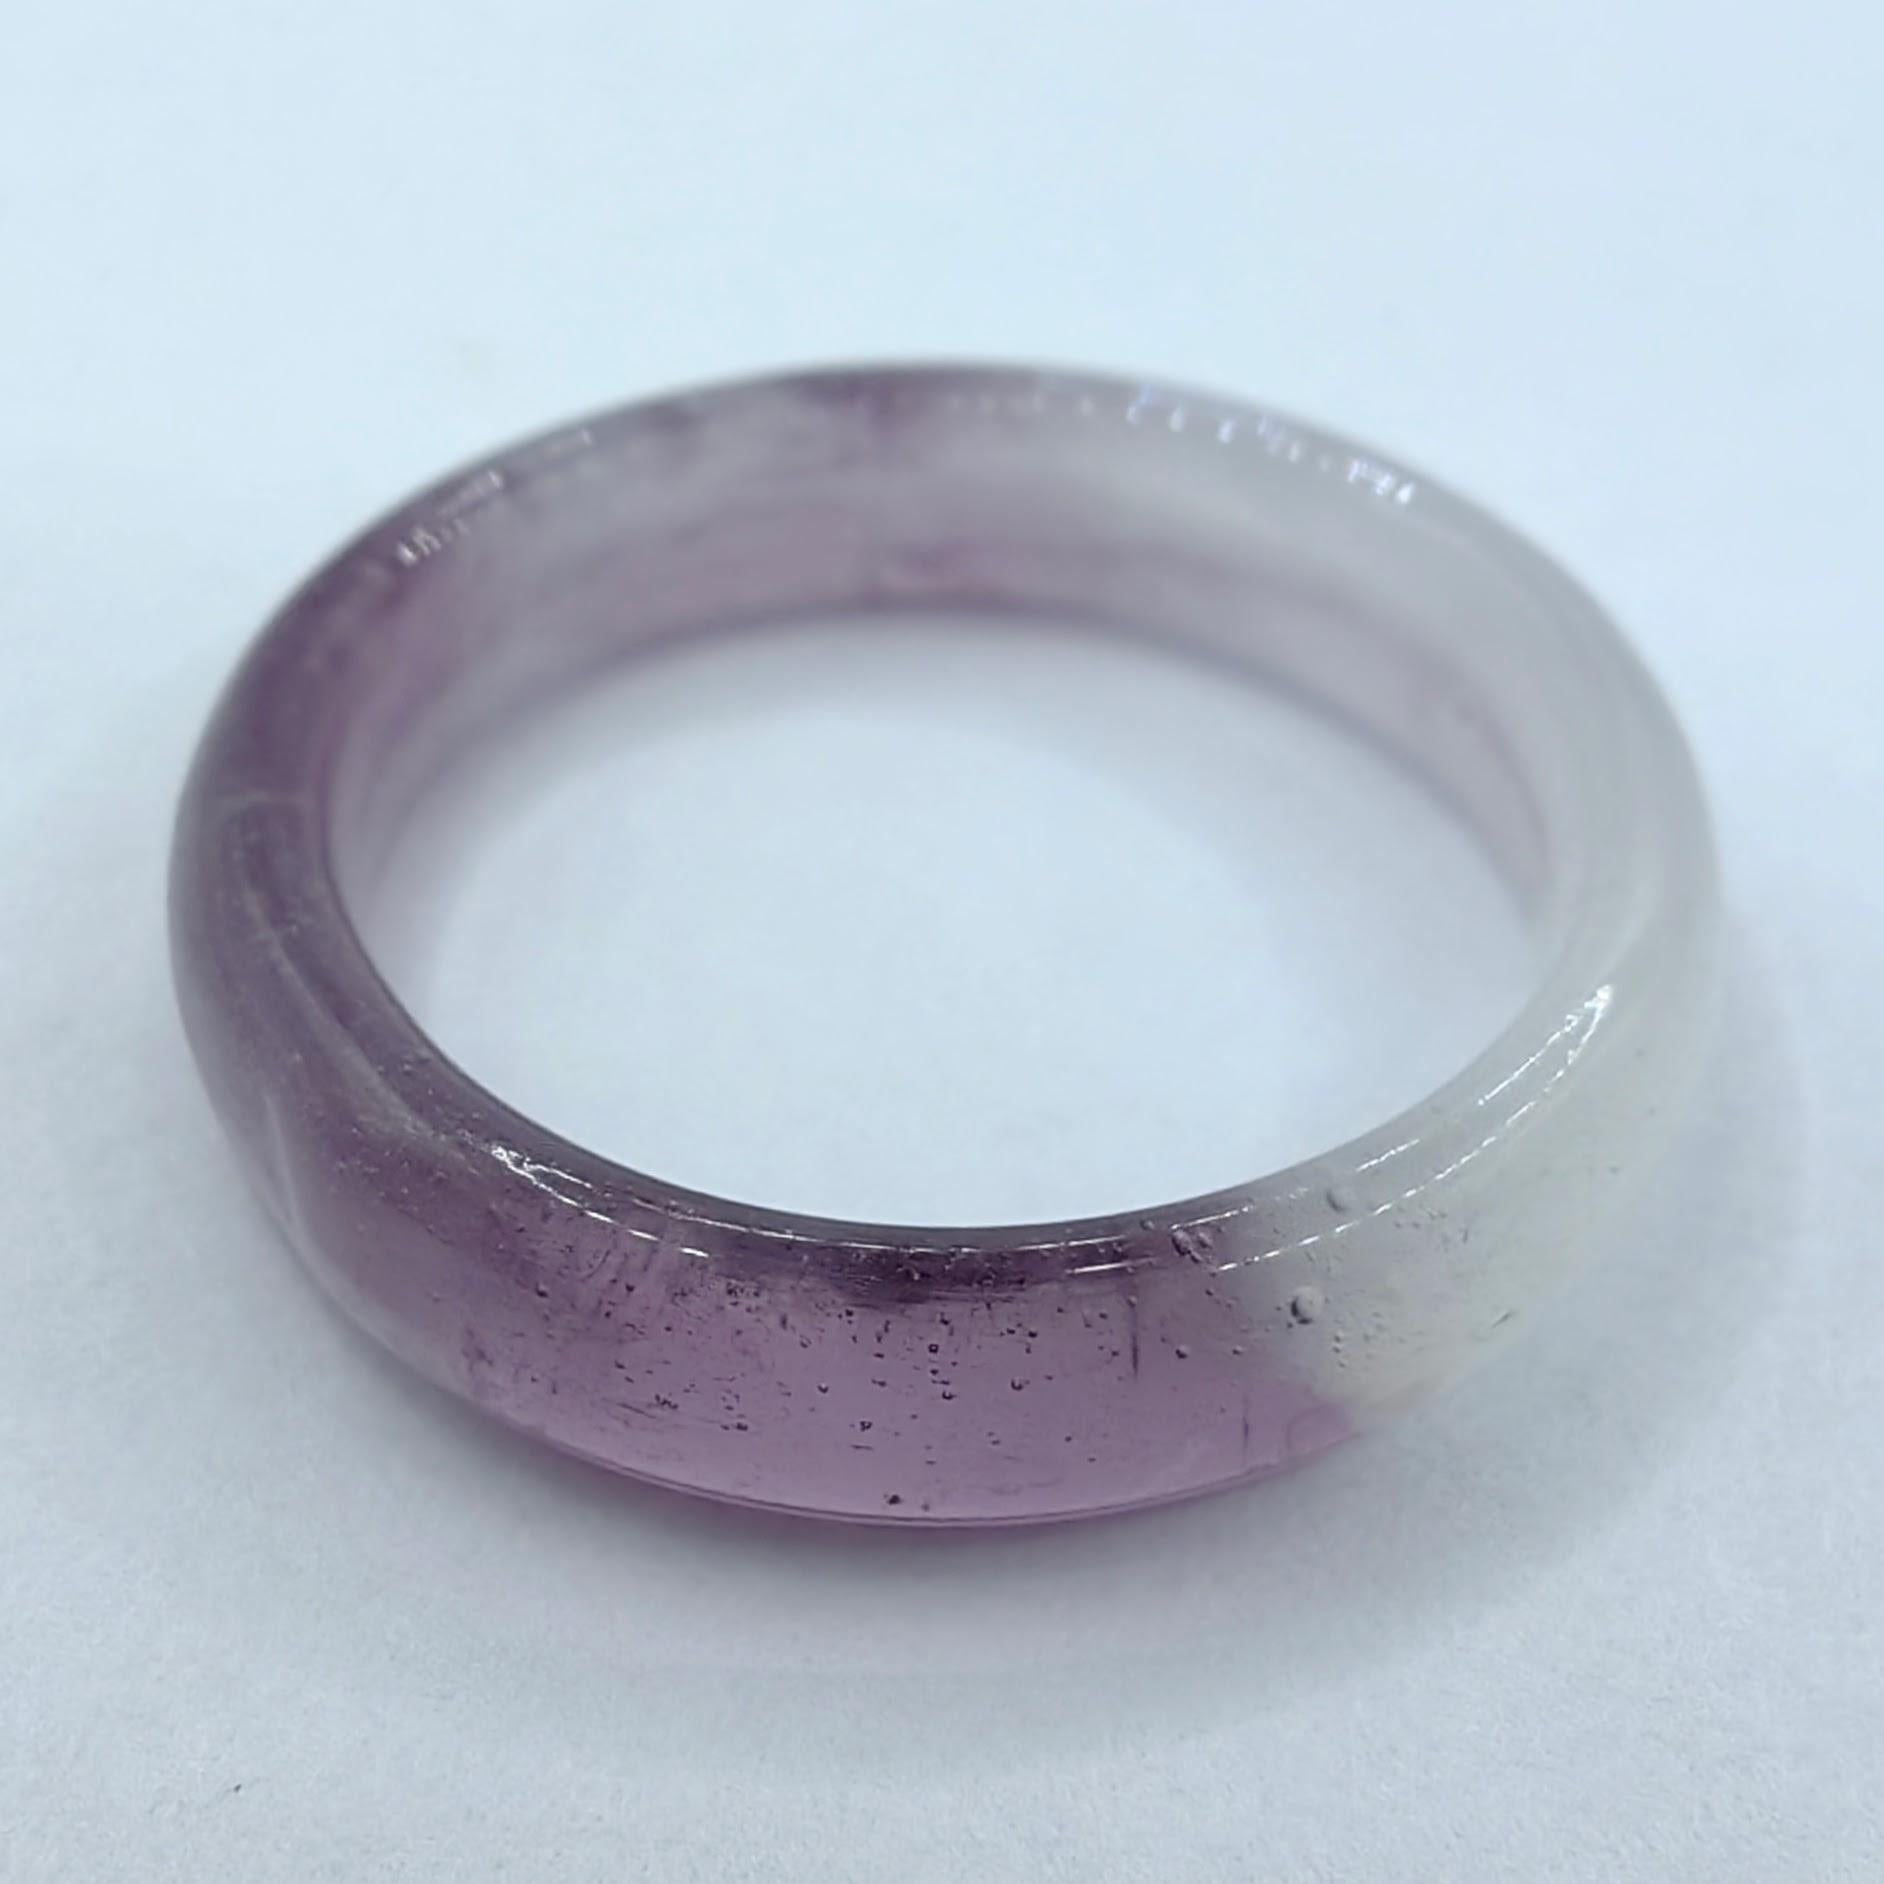 Introducing our Genuine Icy Lavender Serpentine Jade Ring, a mesmerizing piece that celebrates the unique beauty and metaphysical properties of Serpentine Jade. Crafted entirely from this exceptional gemstone, this ring showcases a harmonious blend